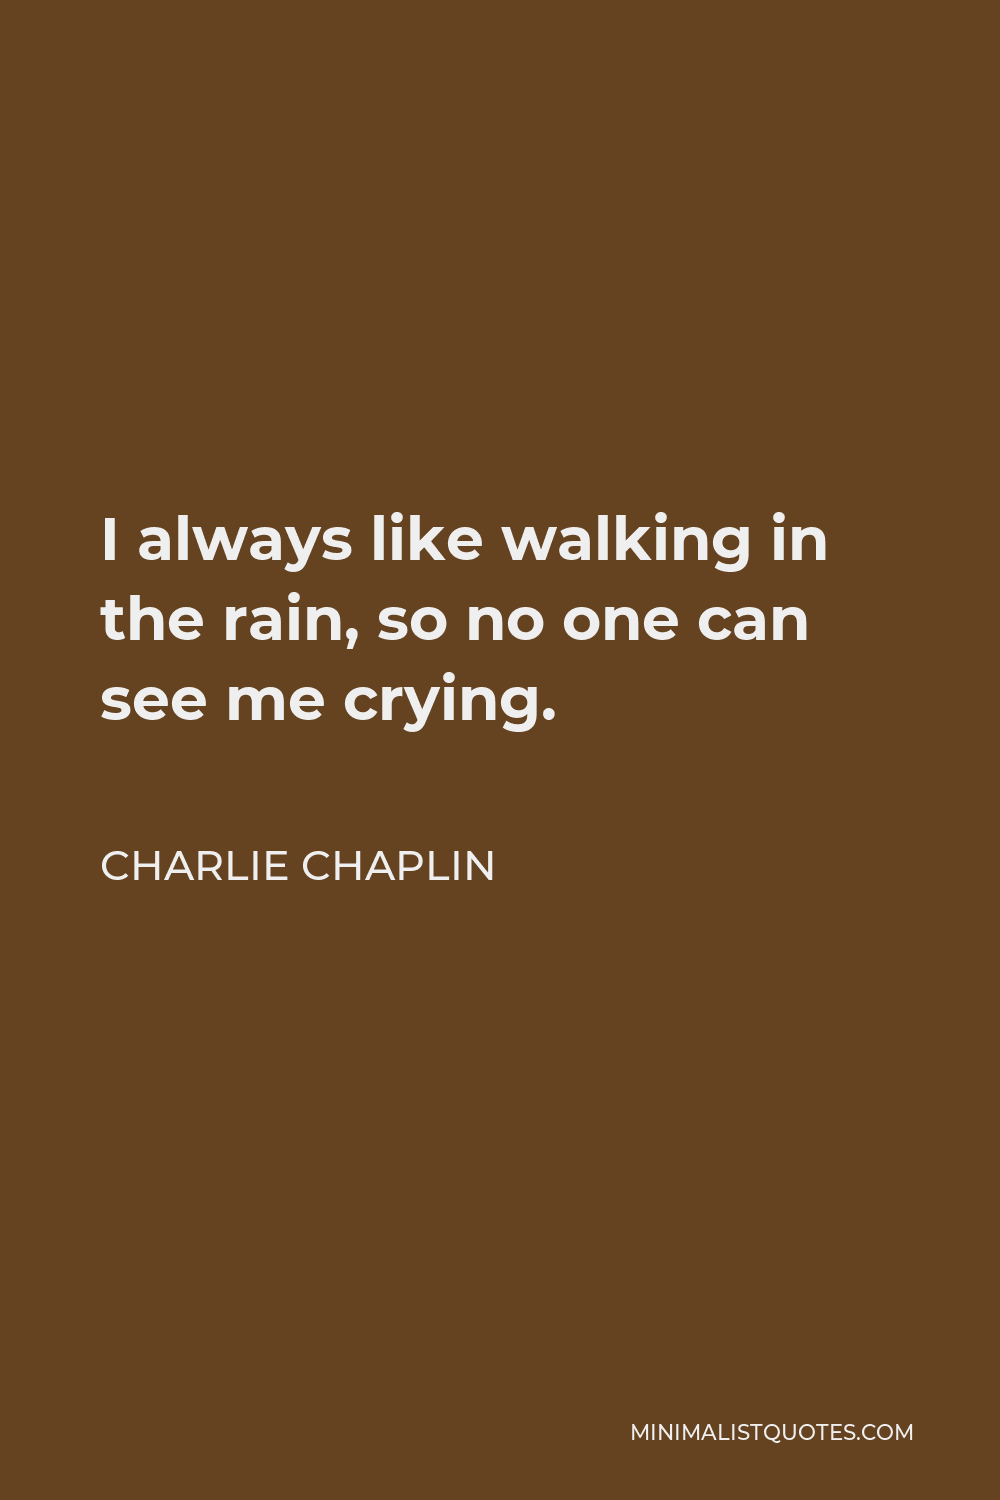 Charlie Chaplin Quote - I always like walking in the rain, so no one can see me crying.